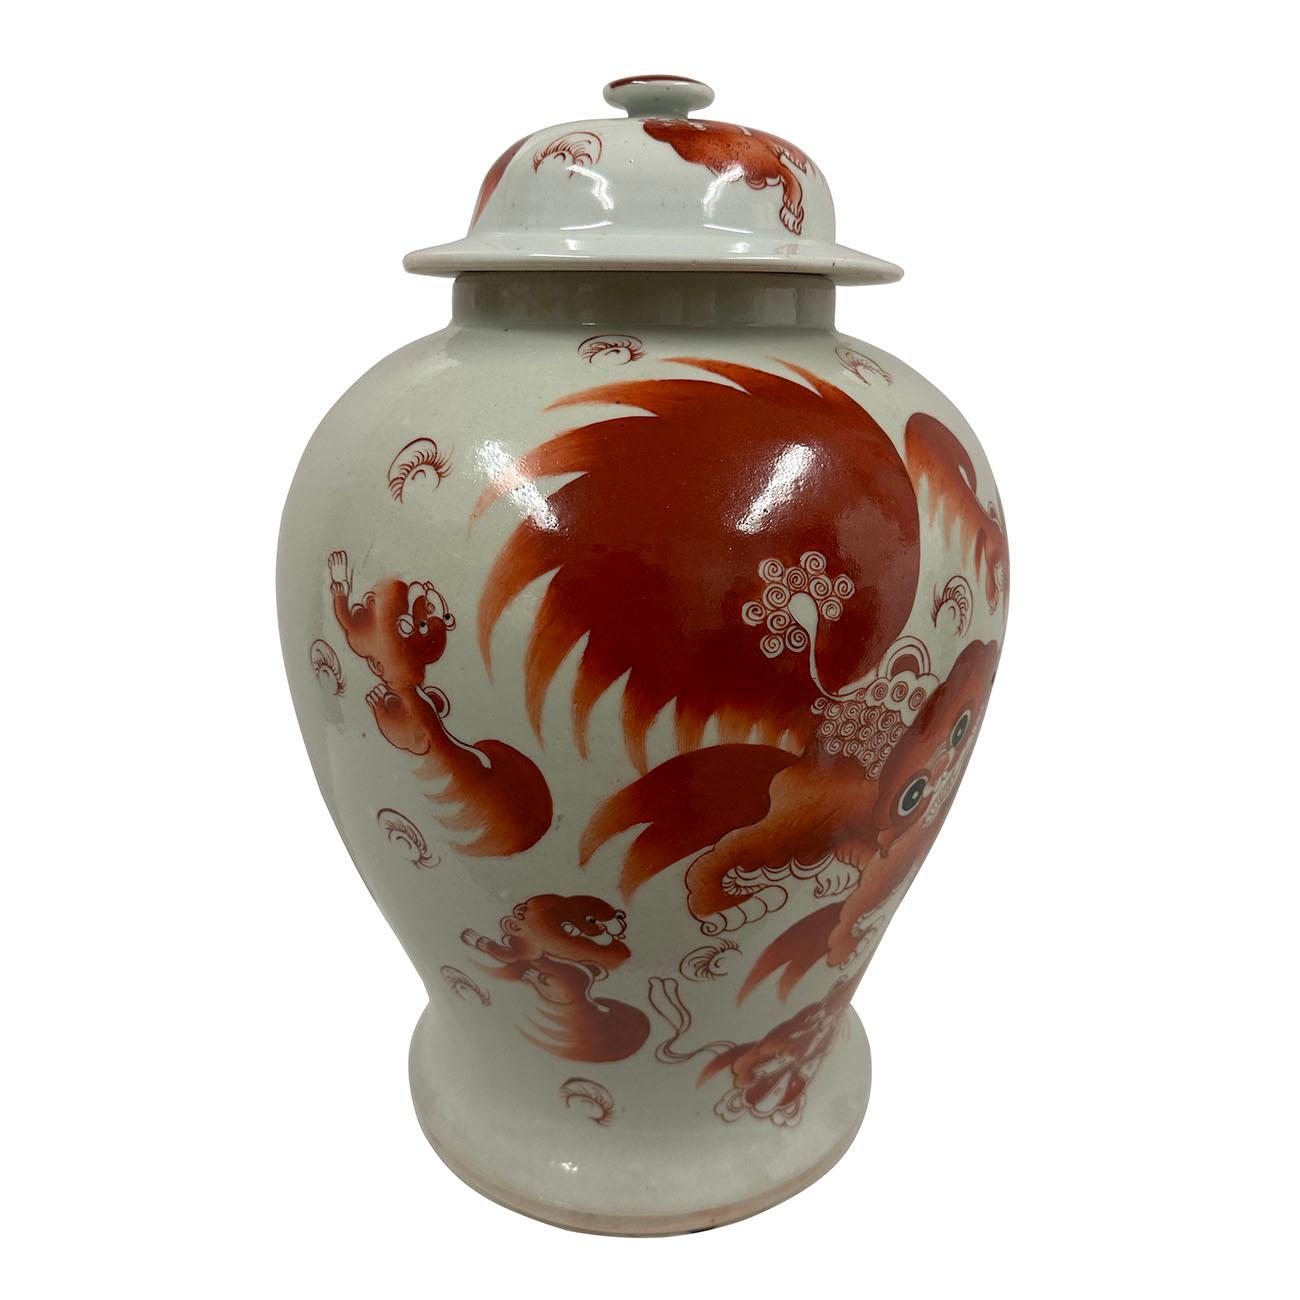 This magnificent Antique Chinese Famille-Rose porcelain Ginger Jar was 100% hand made and hand paint from famous Chinese Famille-Rose Porcelain. It has beautiful hand painted foo dogs playing on the jar and lid. You can see from the pictures that it